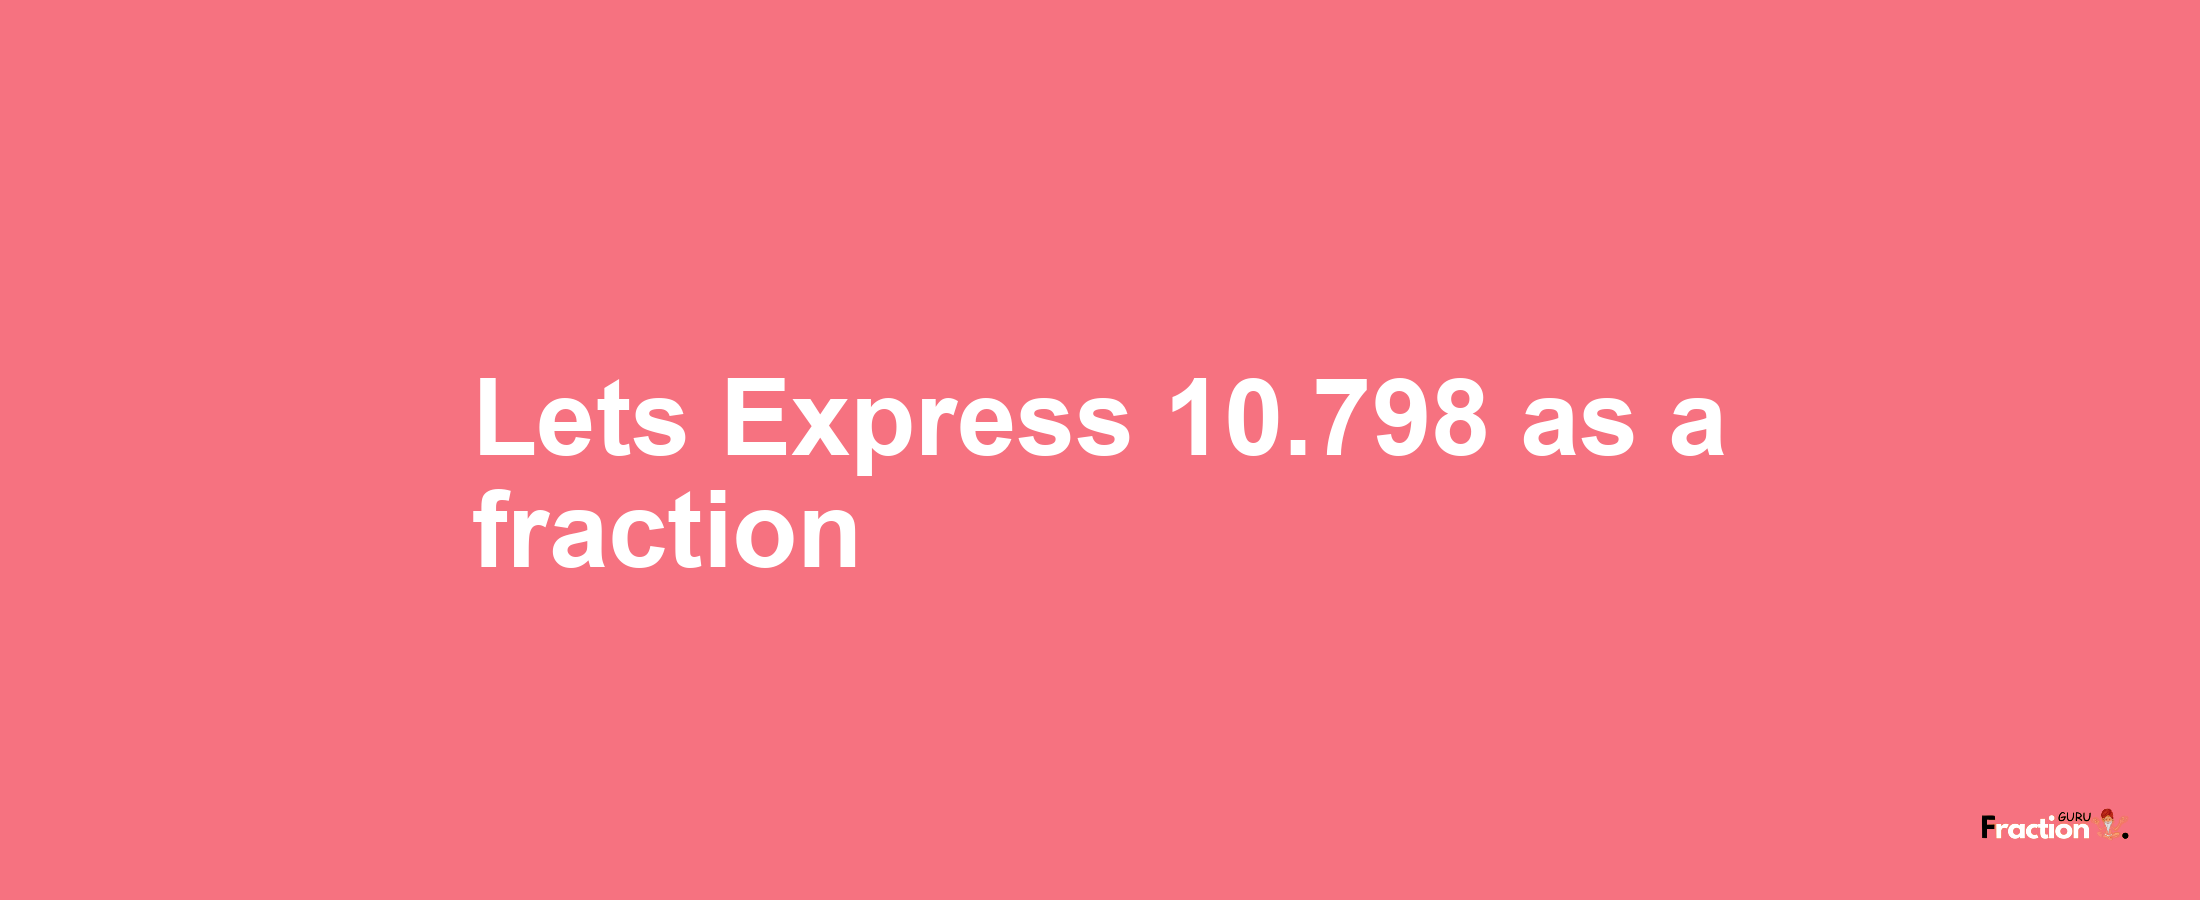 Lets Express 10.798 as afraction